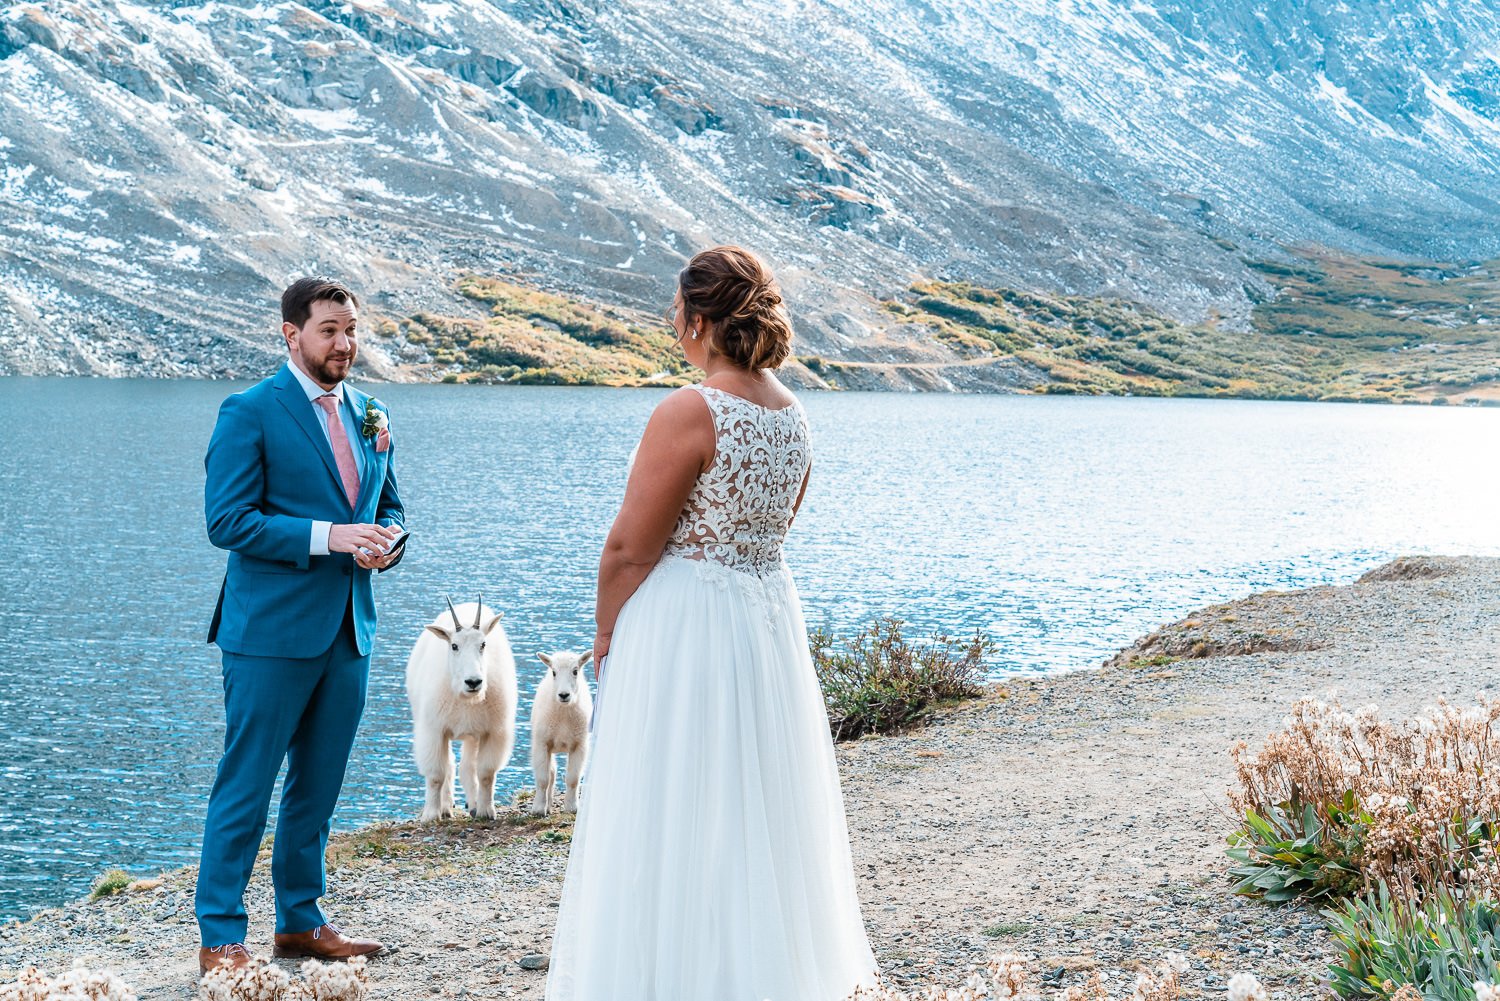 An intimate elopement photoshoot capturing the bride and groom's joyous moment alongside their beloved dogs, set against the serene backdrop of a picturesque lake.